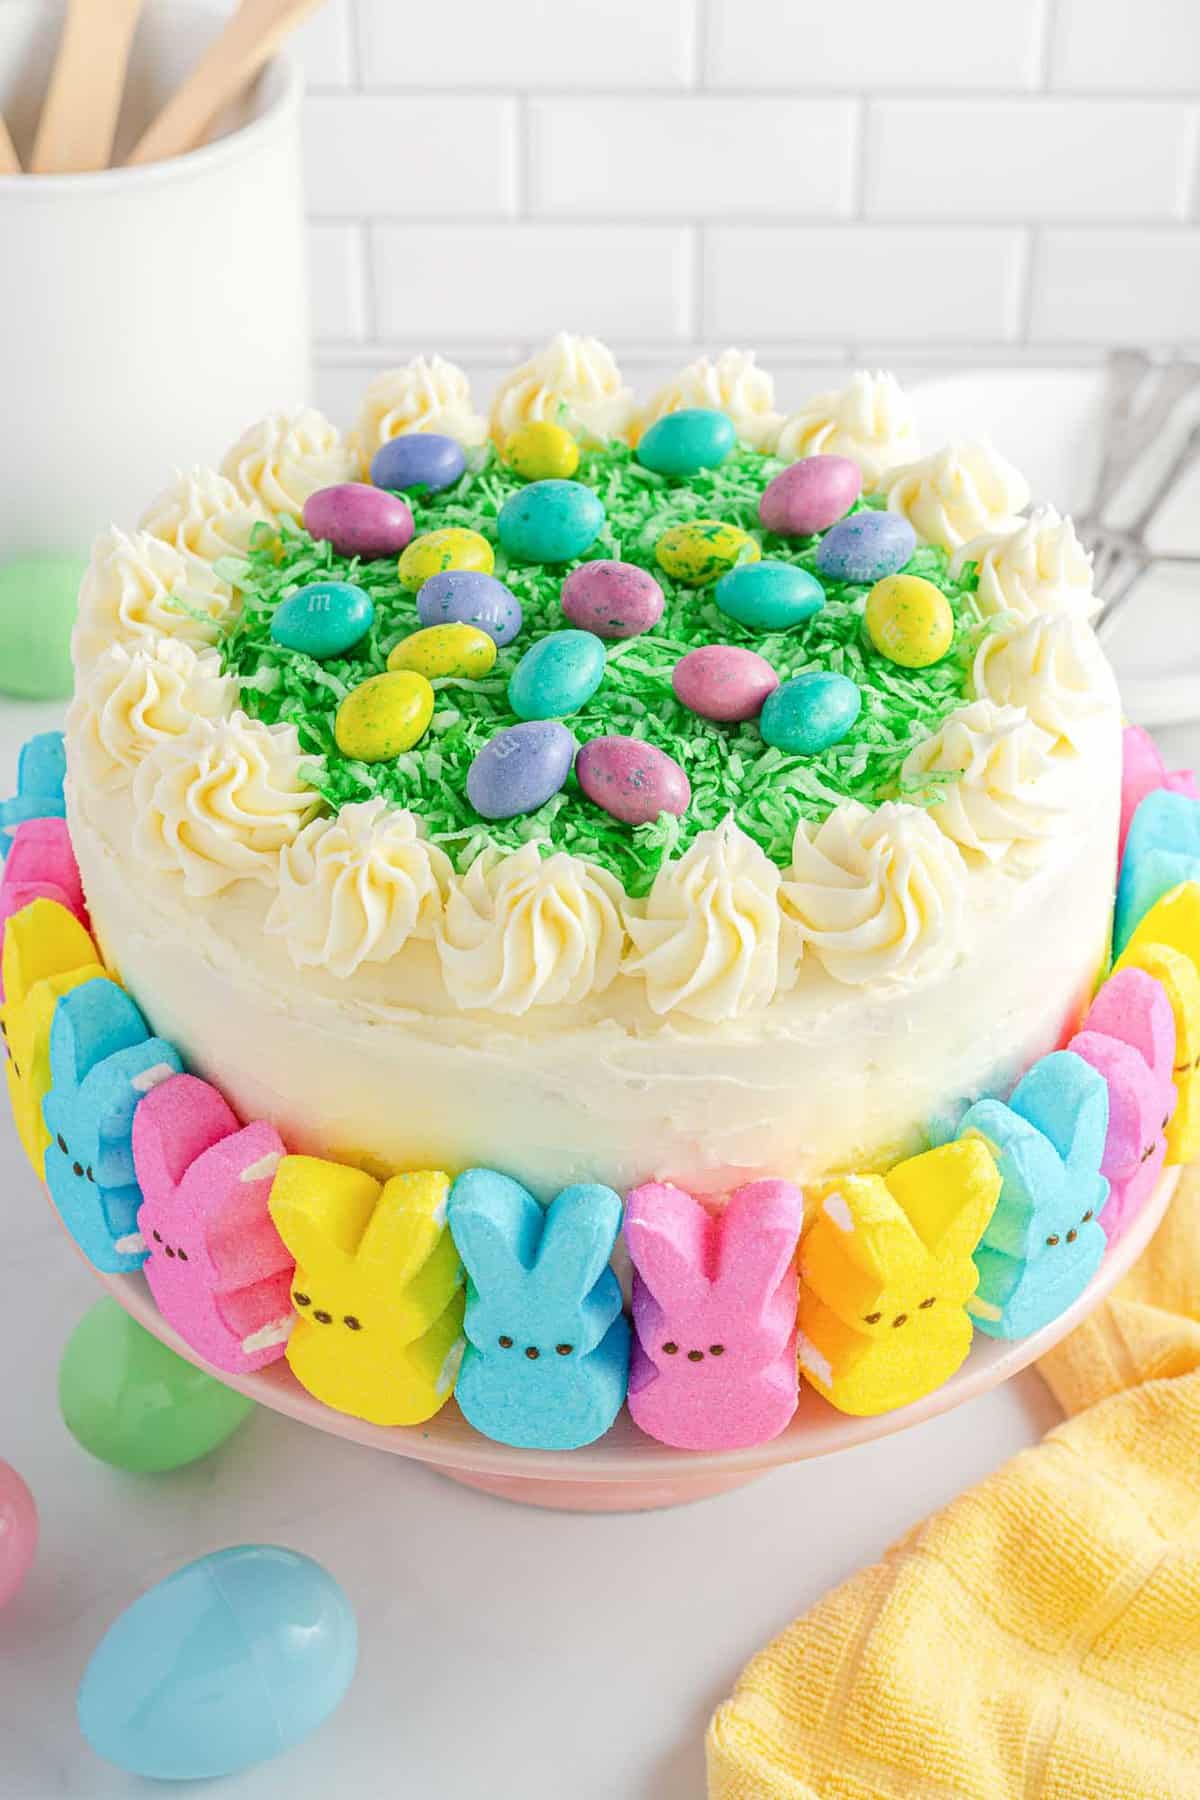 Easter Layer Cake decorated with marshmallow peeps, shredded coconut, and candy eggs.